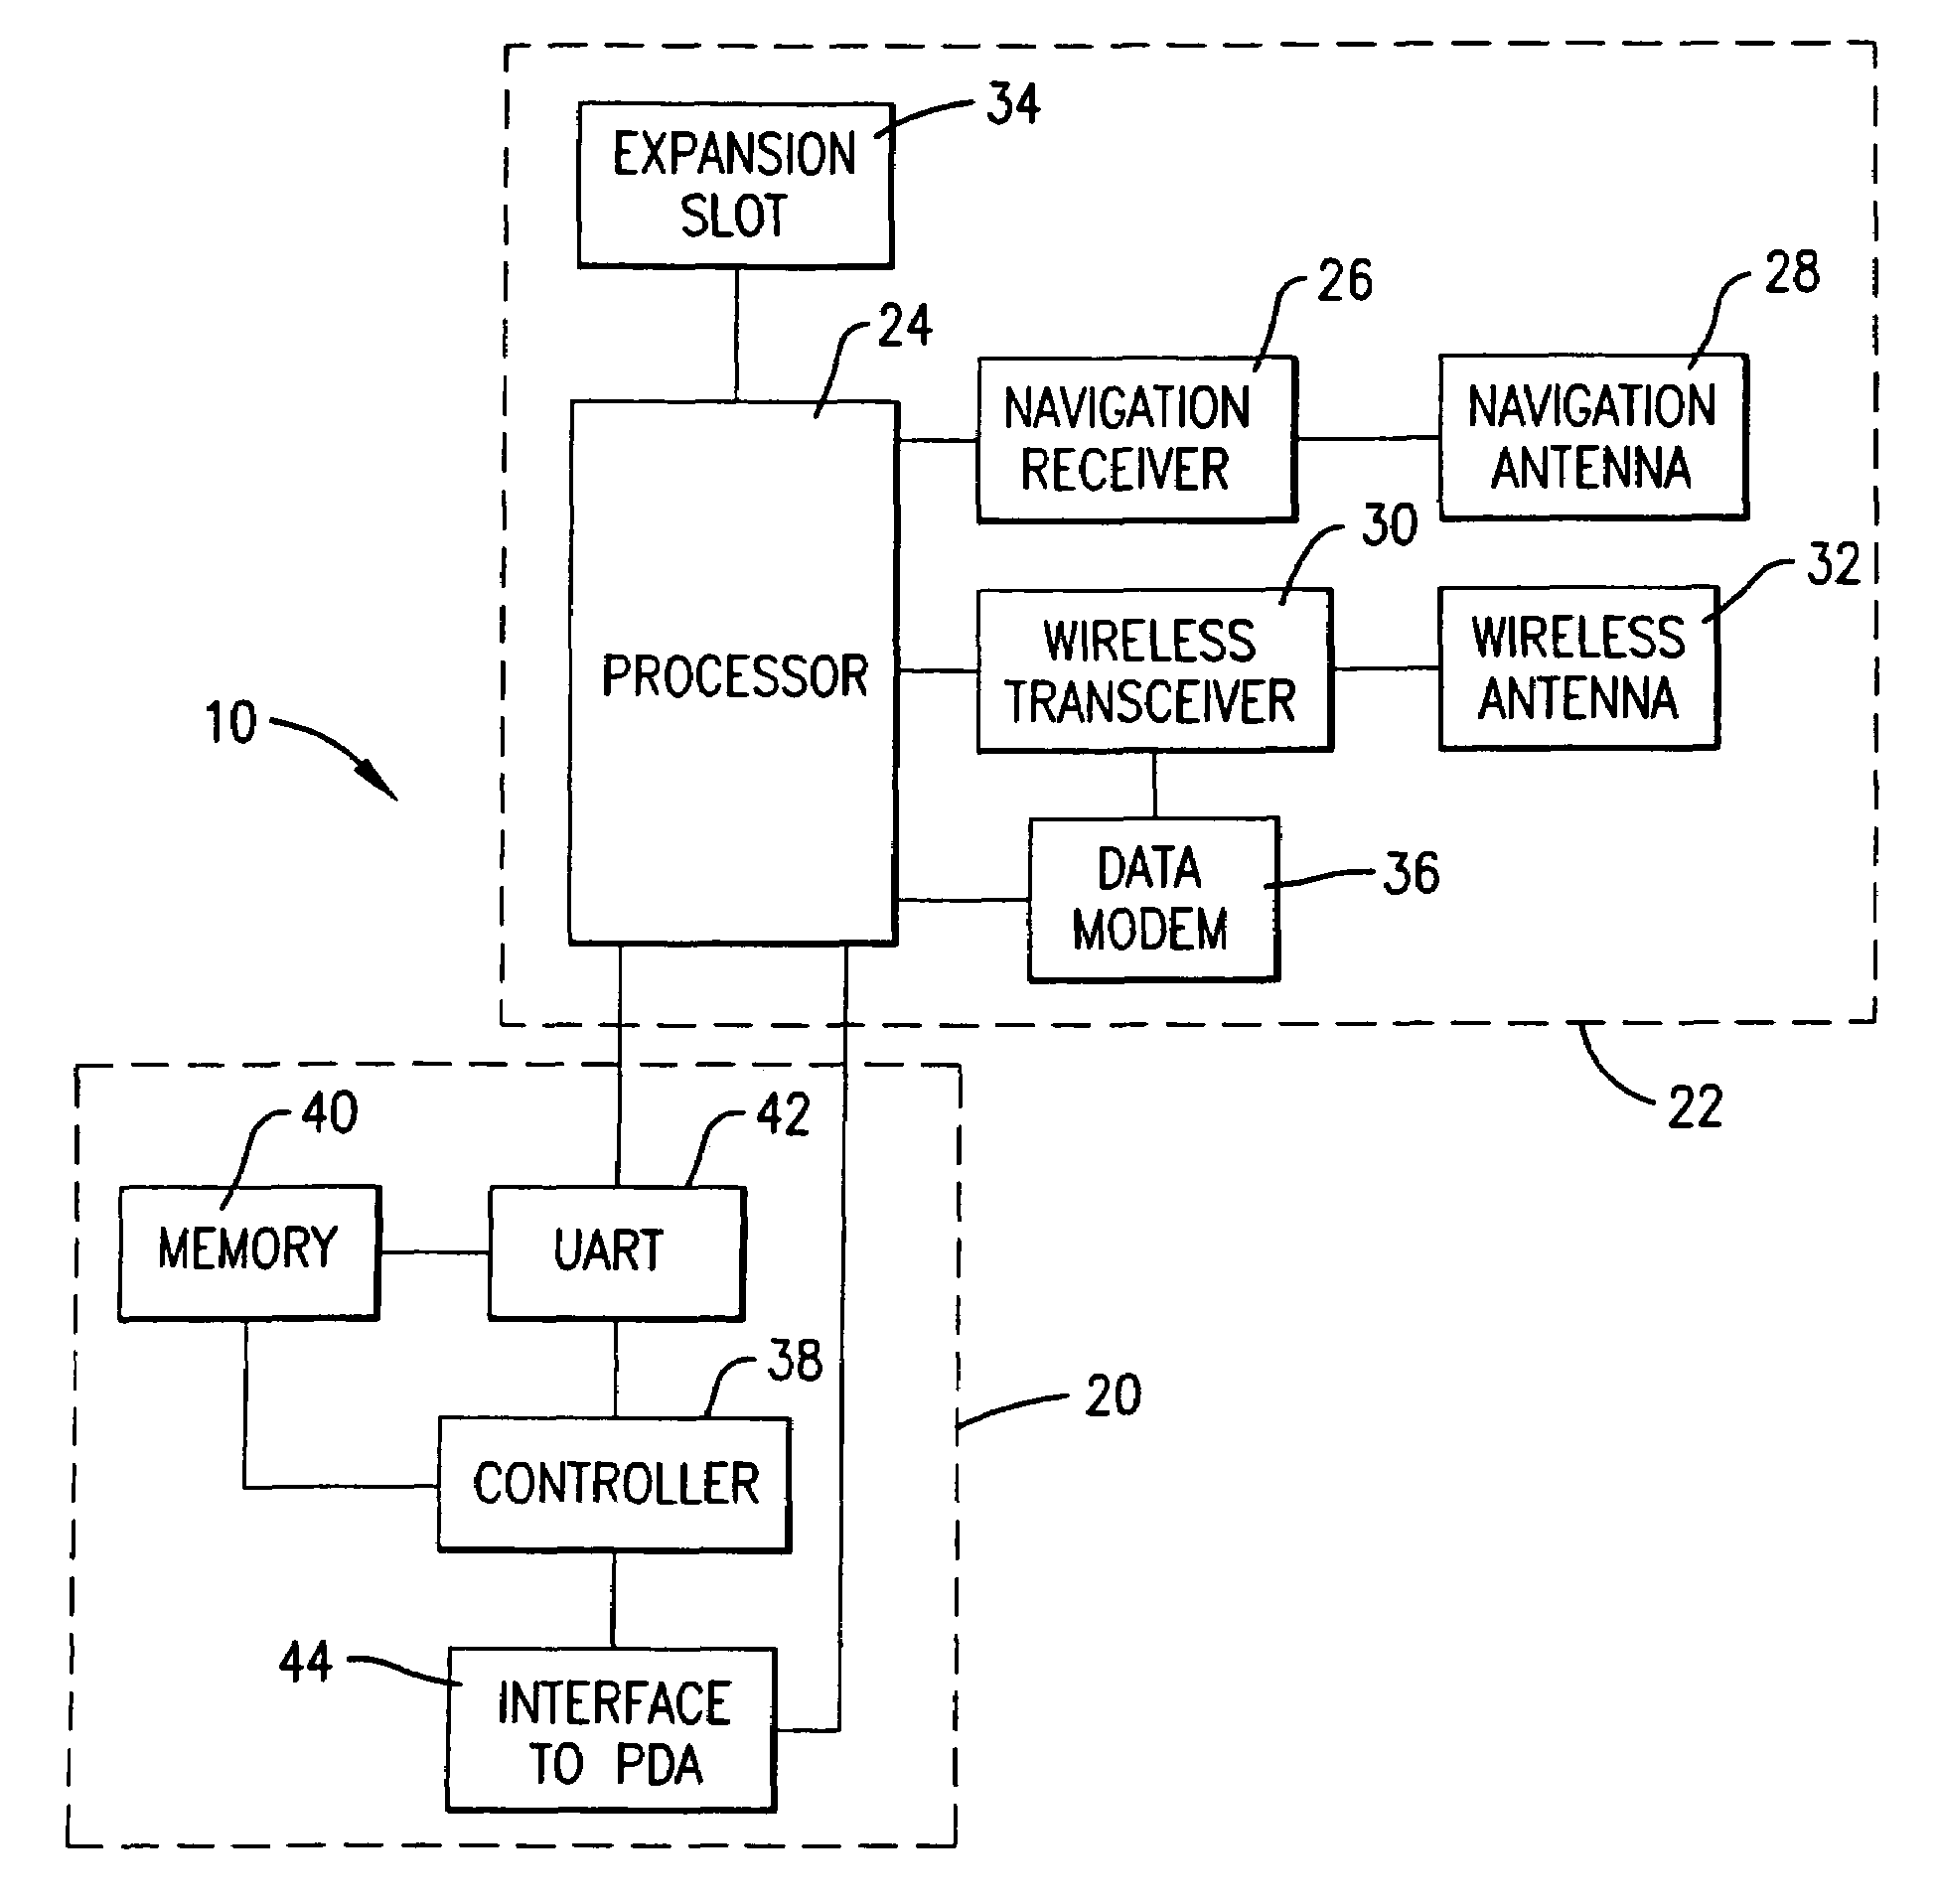 Navigation apparatus for coupling with an expansion slot of a portable, handheld computing device